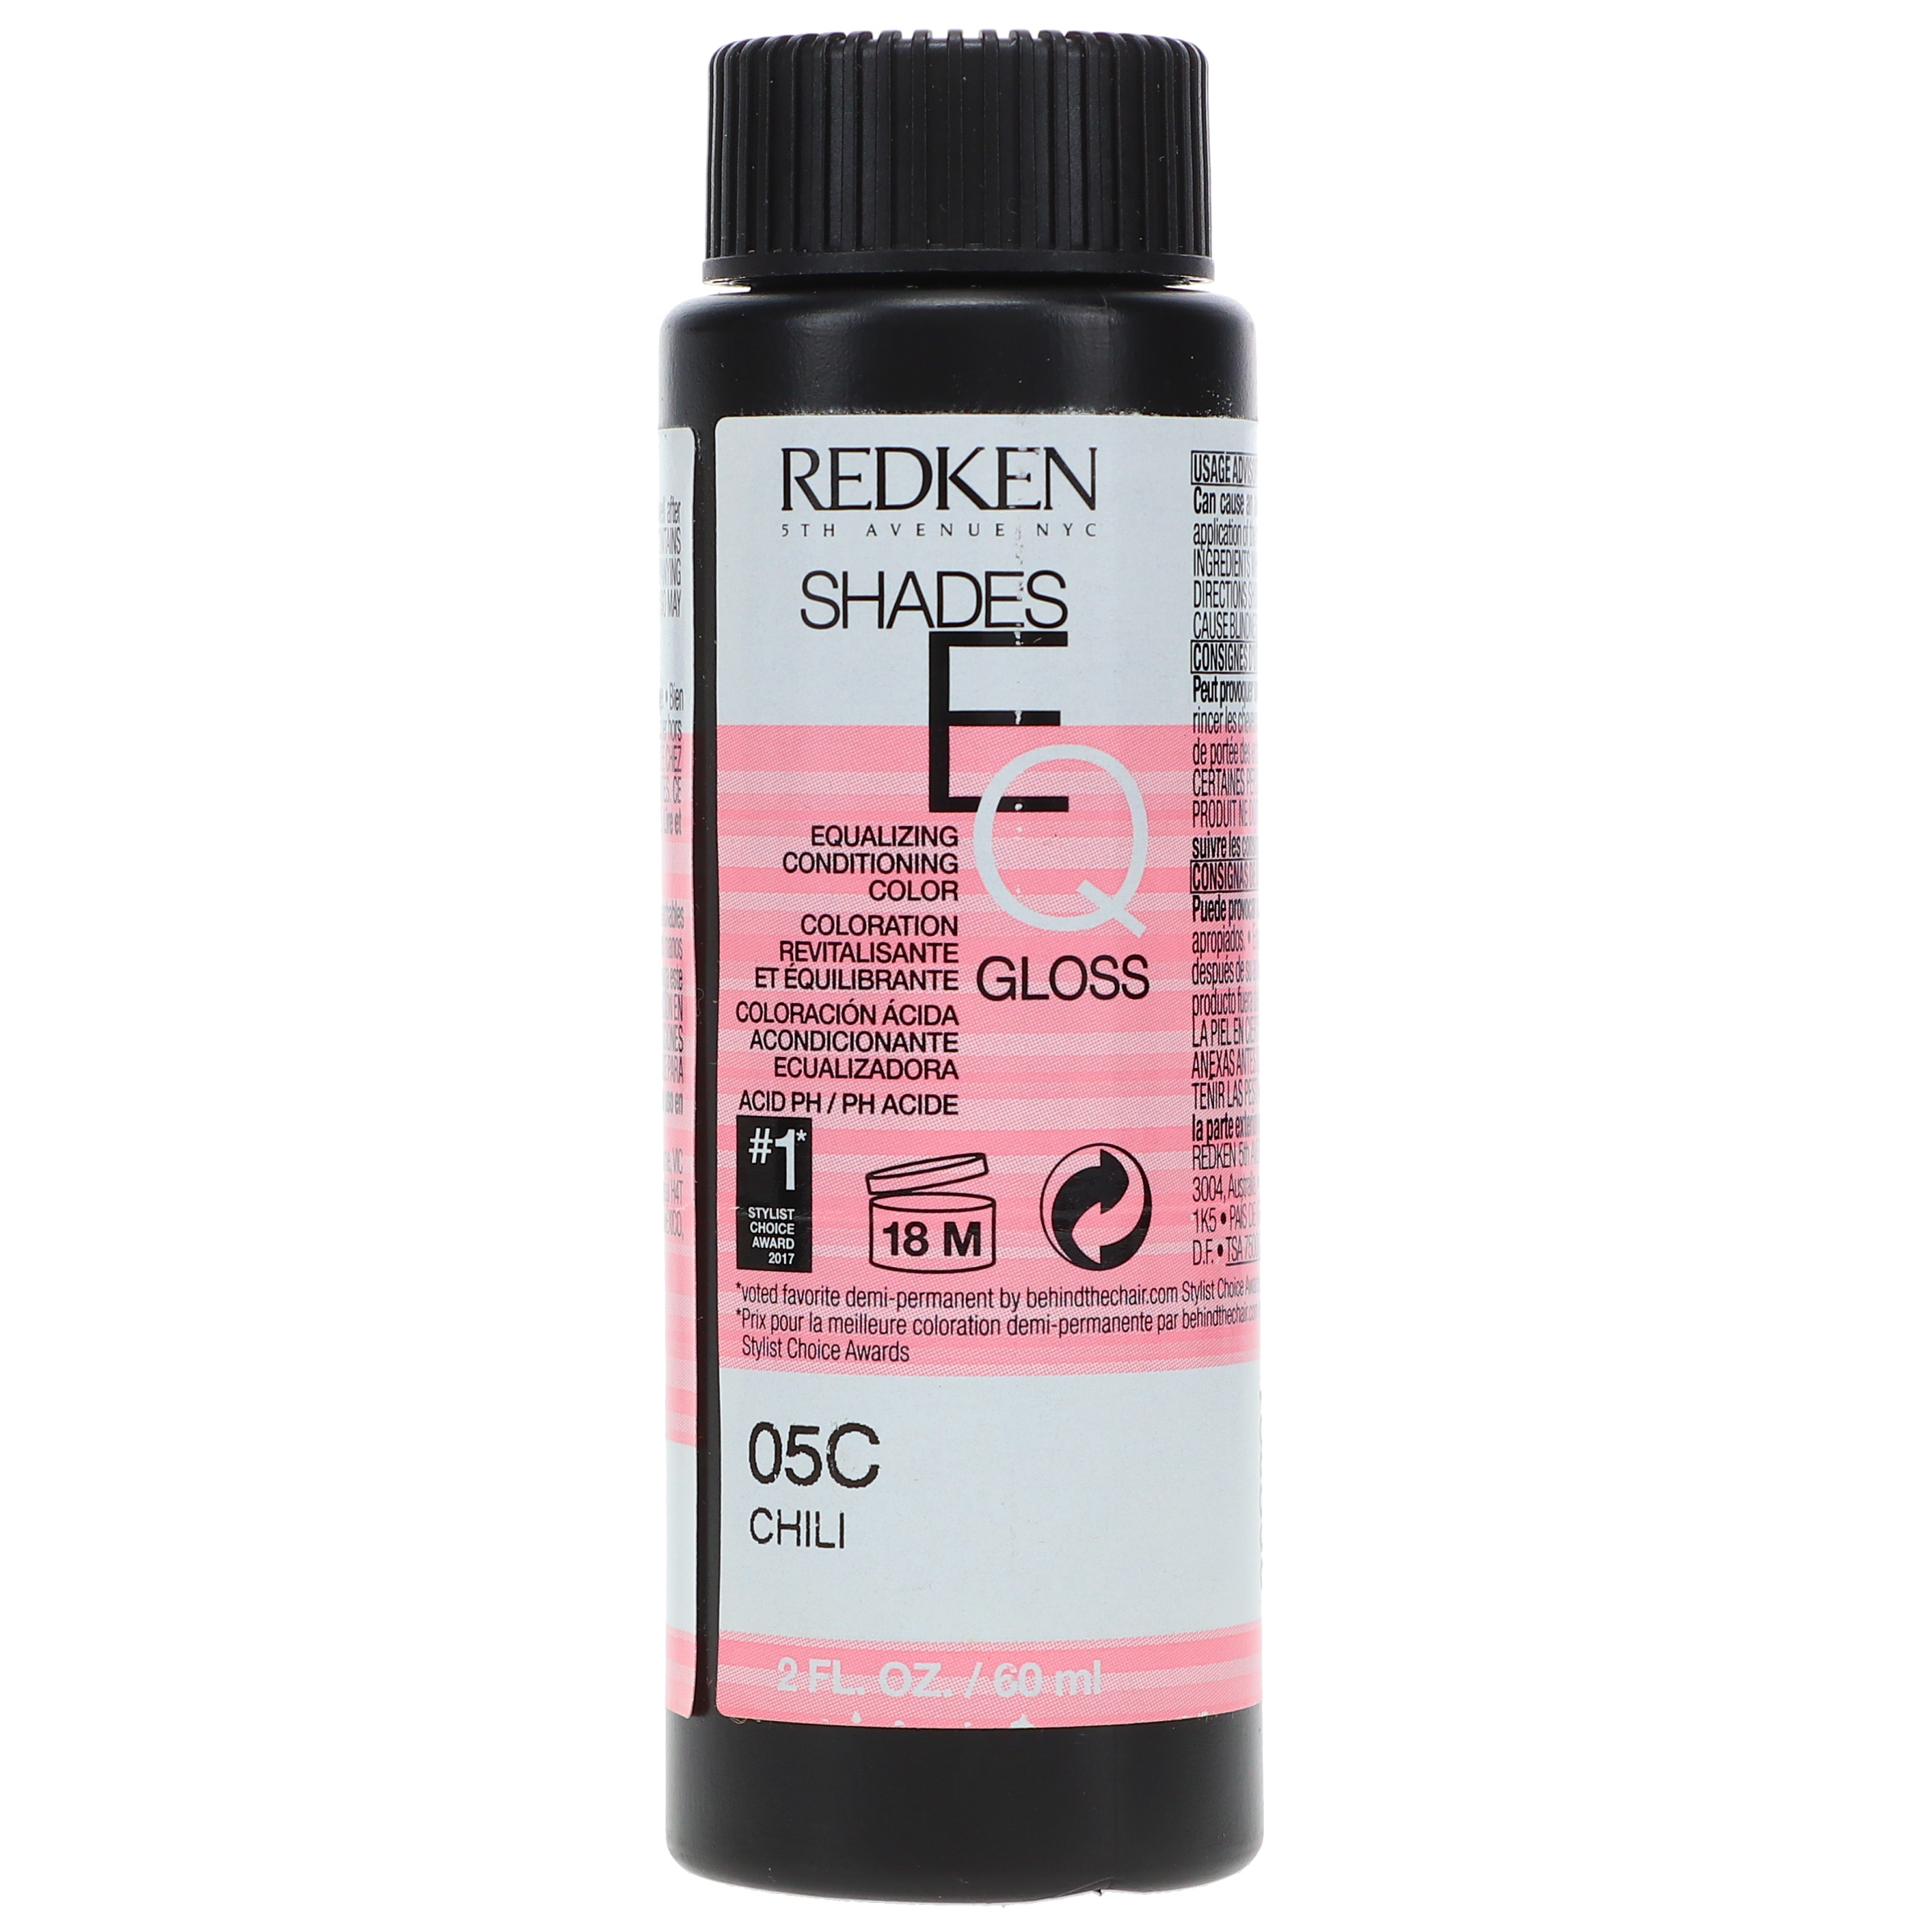 Redken Shades Eq Color Gloss 05C - Chili For Women, 2 Oz - image 1 of 2